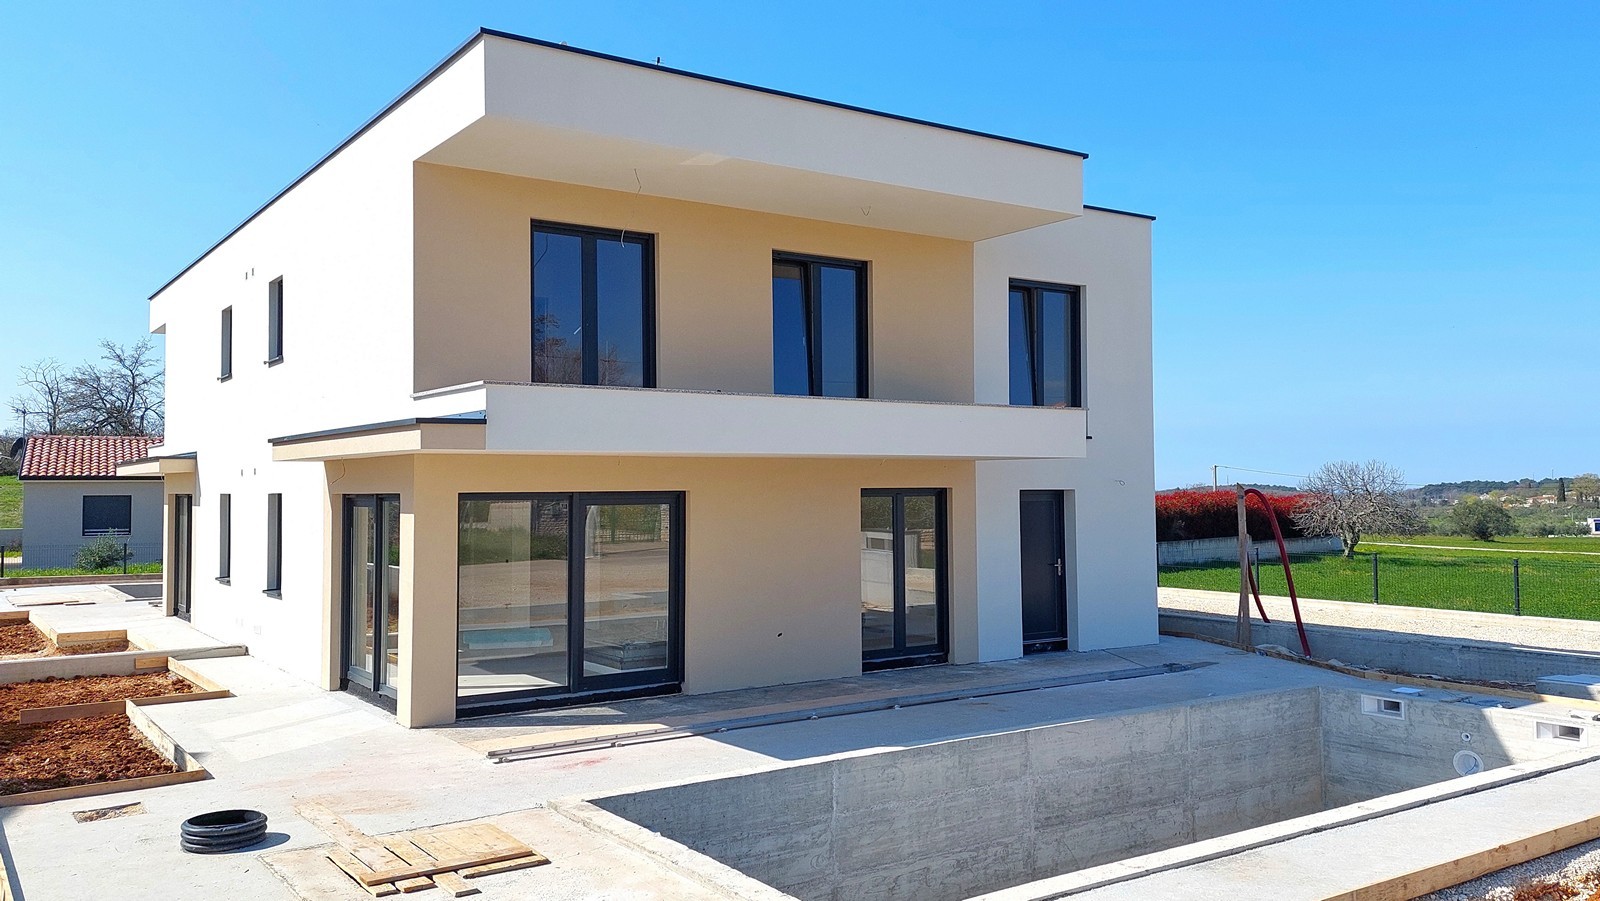 New semi-detached house with swimming pool in Poreč